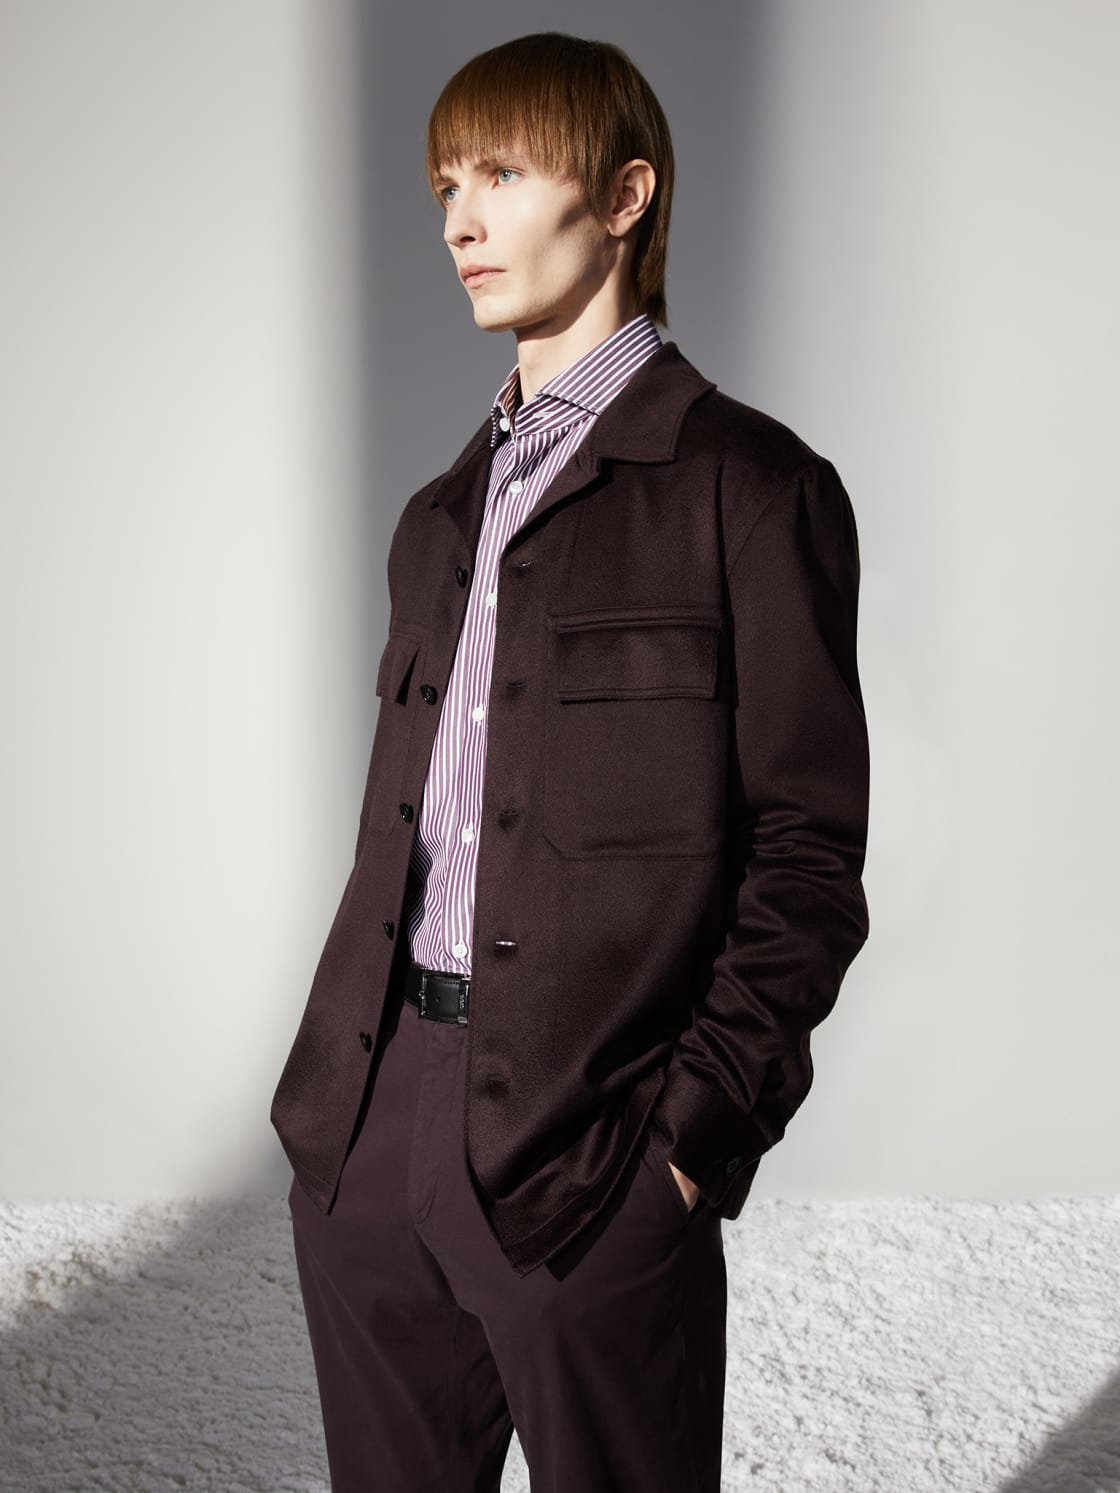 Male model with dark purple outfit